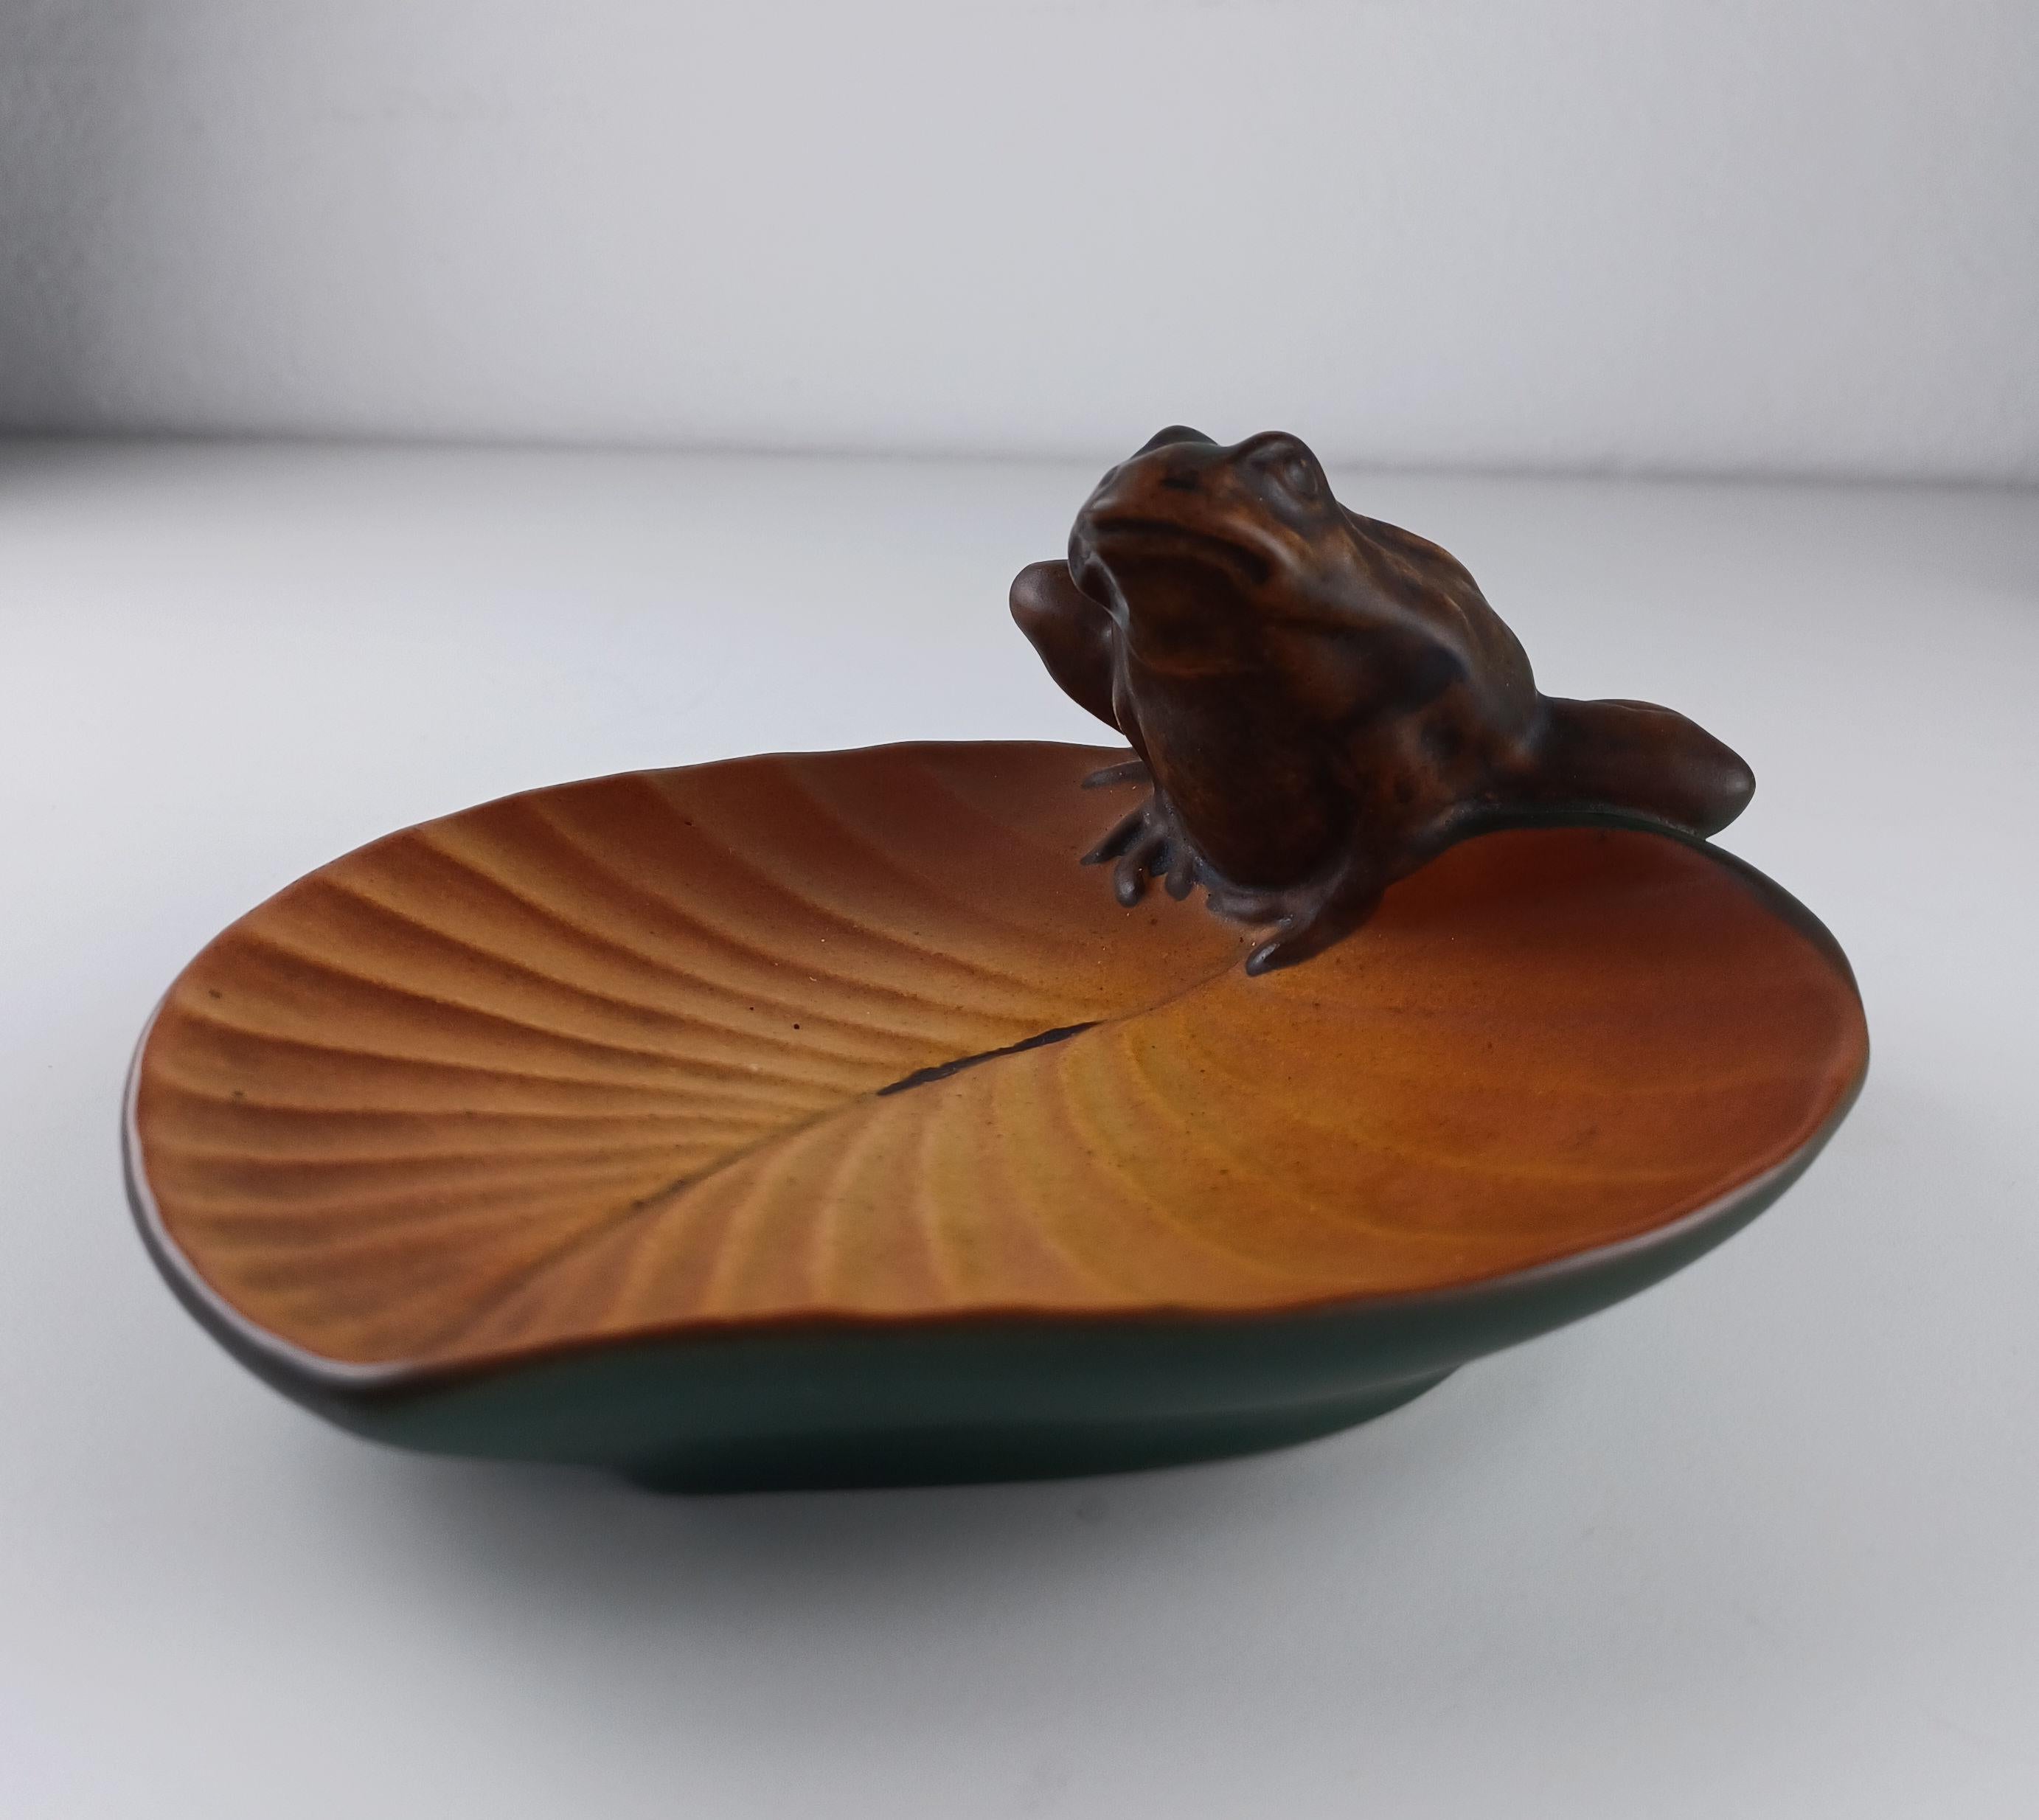 1920's Small Handcrafed Danish Art Nouveau Handcrafted Frog Dish by Ipsens Enke For Sale 1